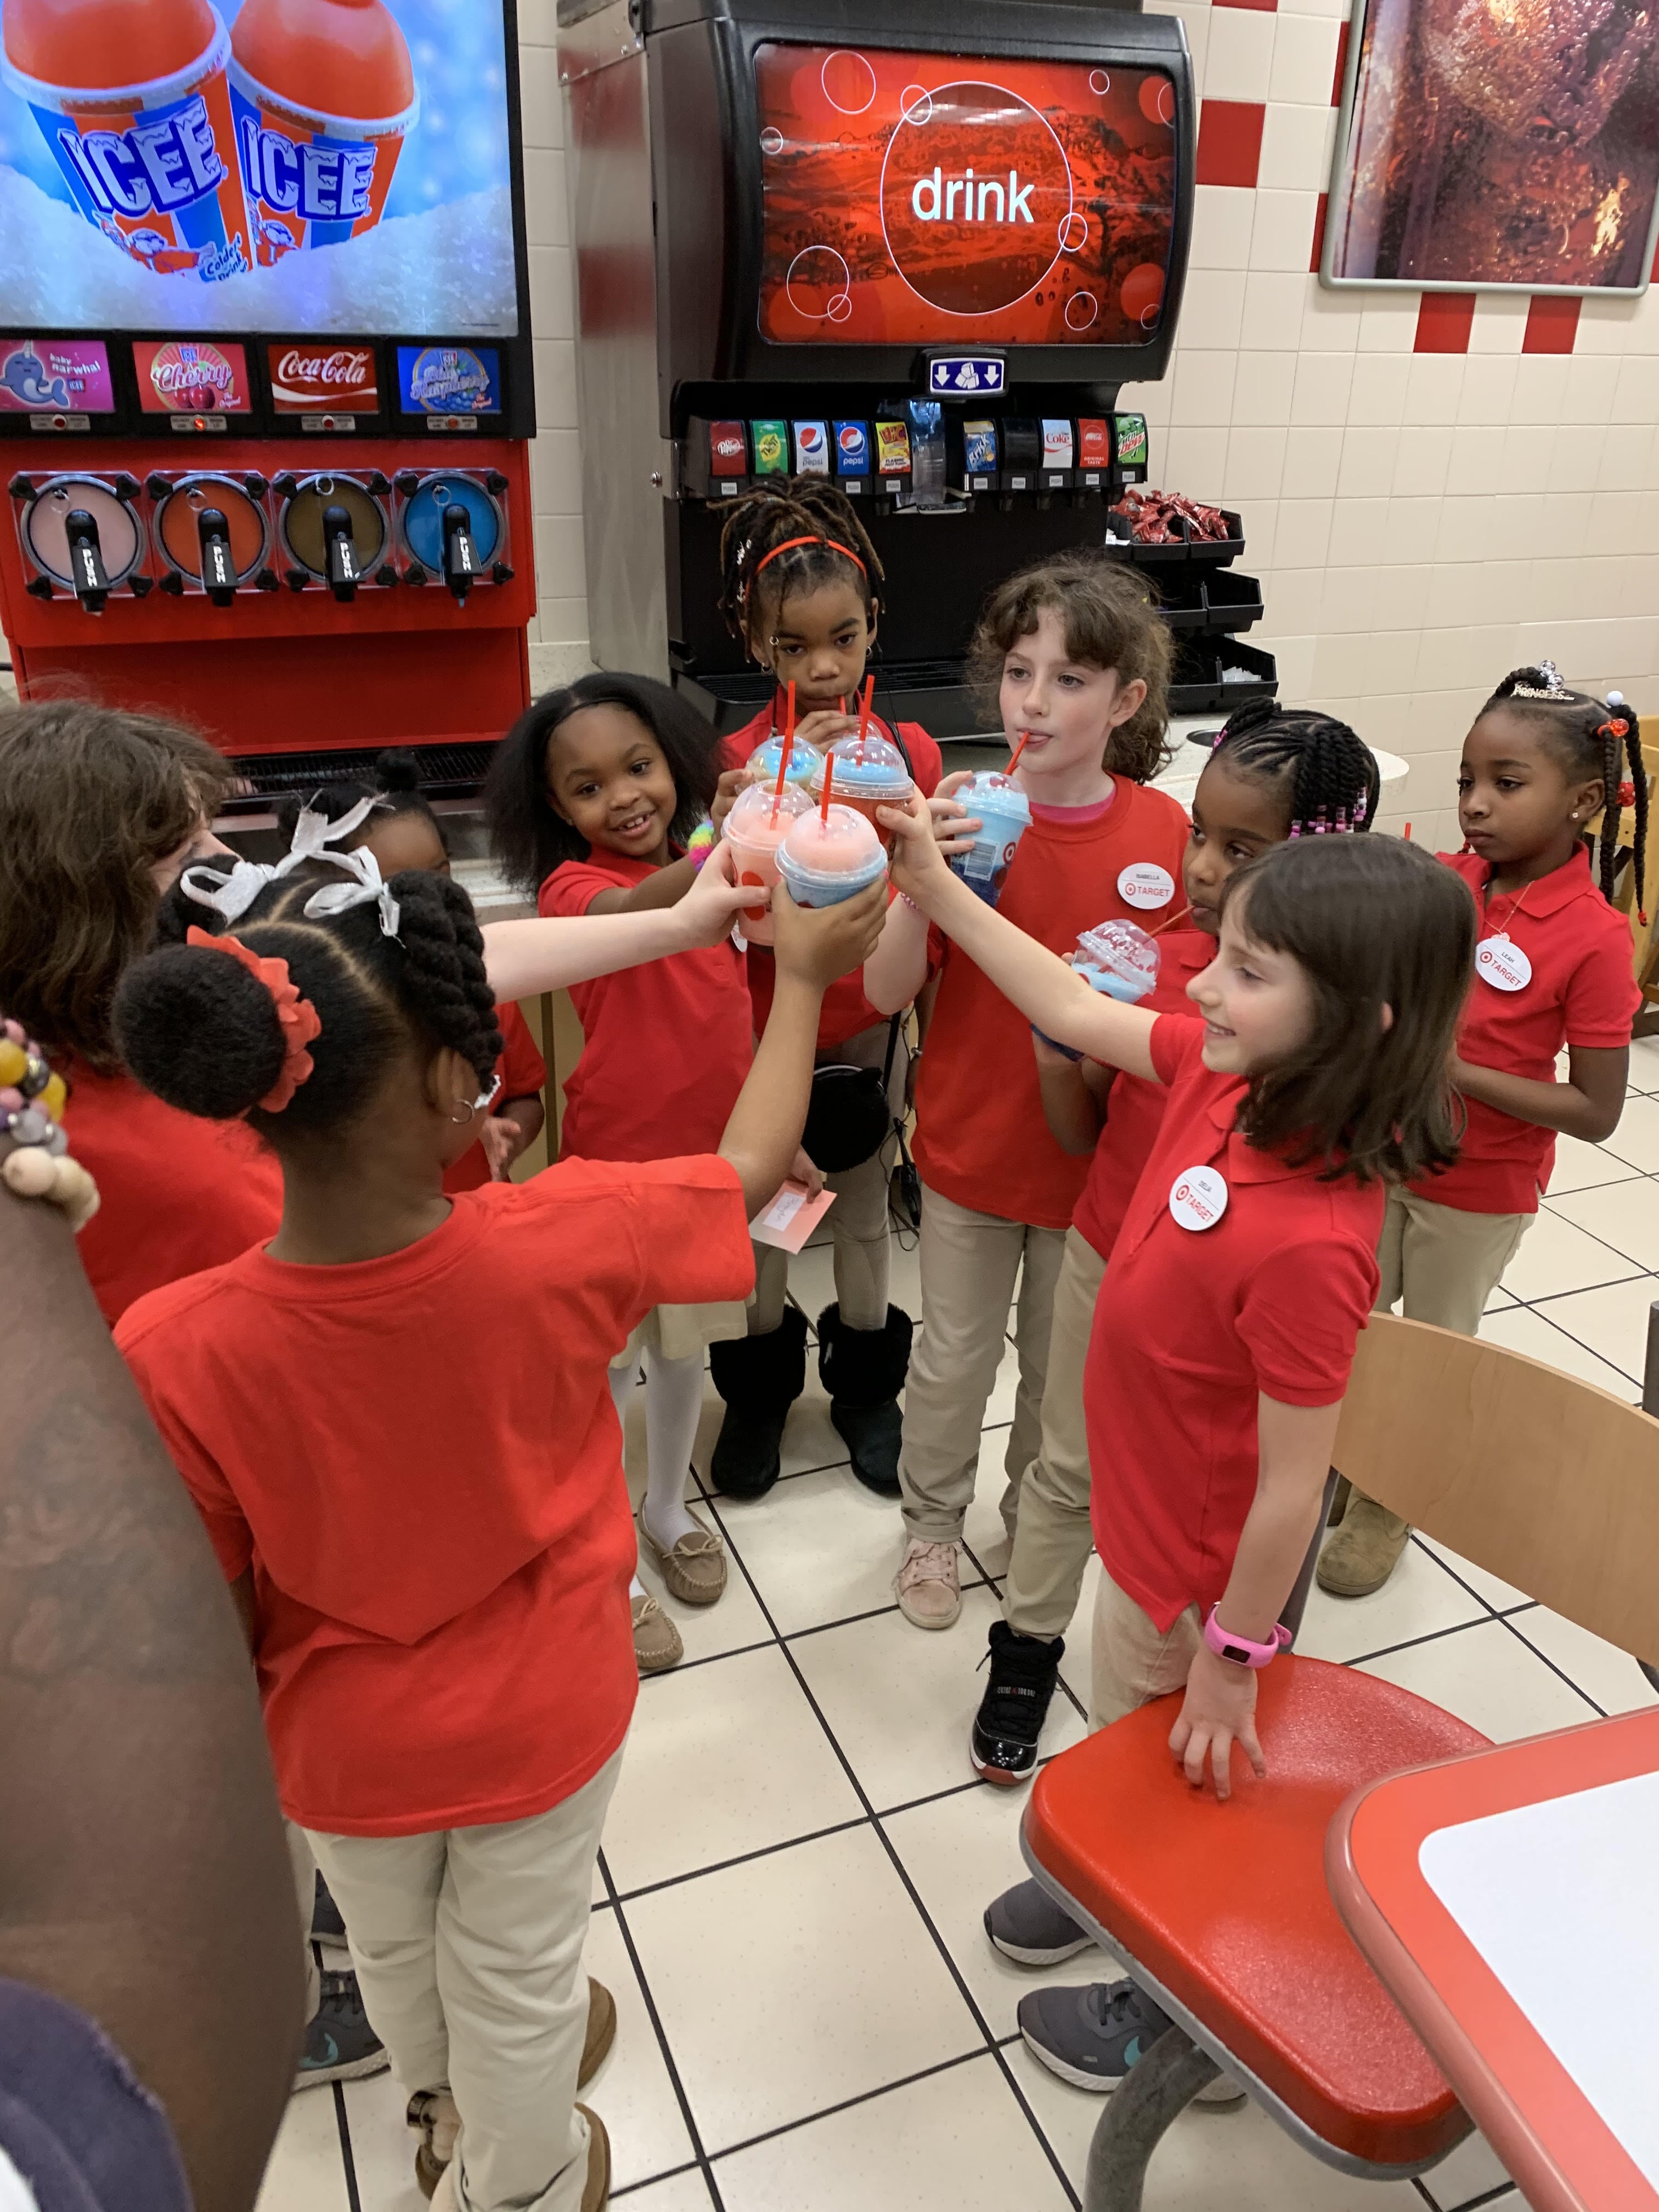 8-year-old Takes Over Target to Throw Birthday Party